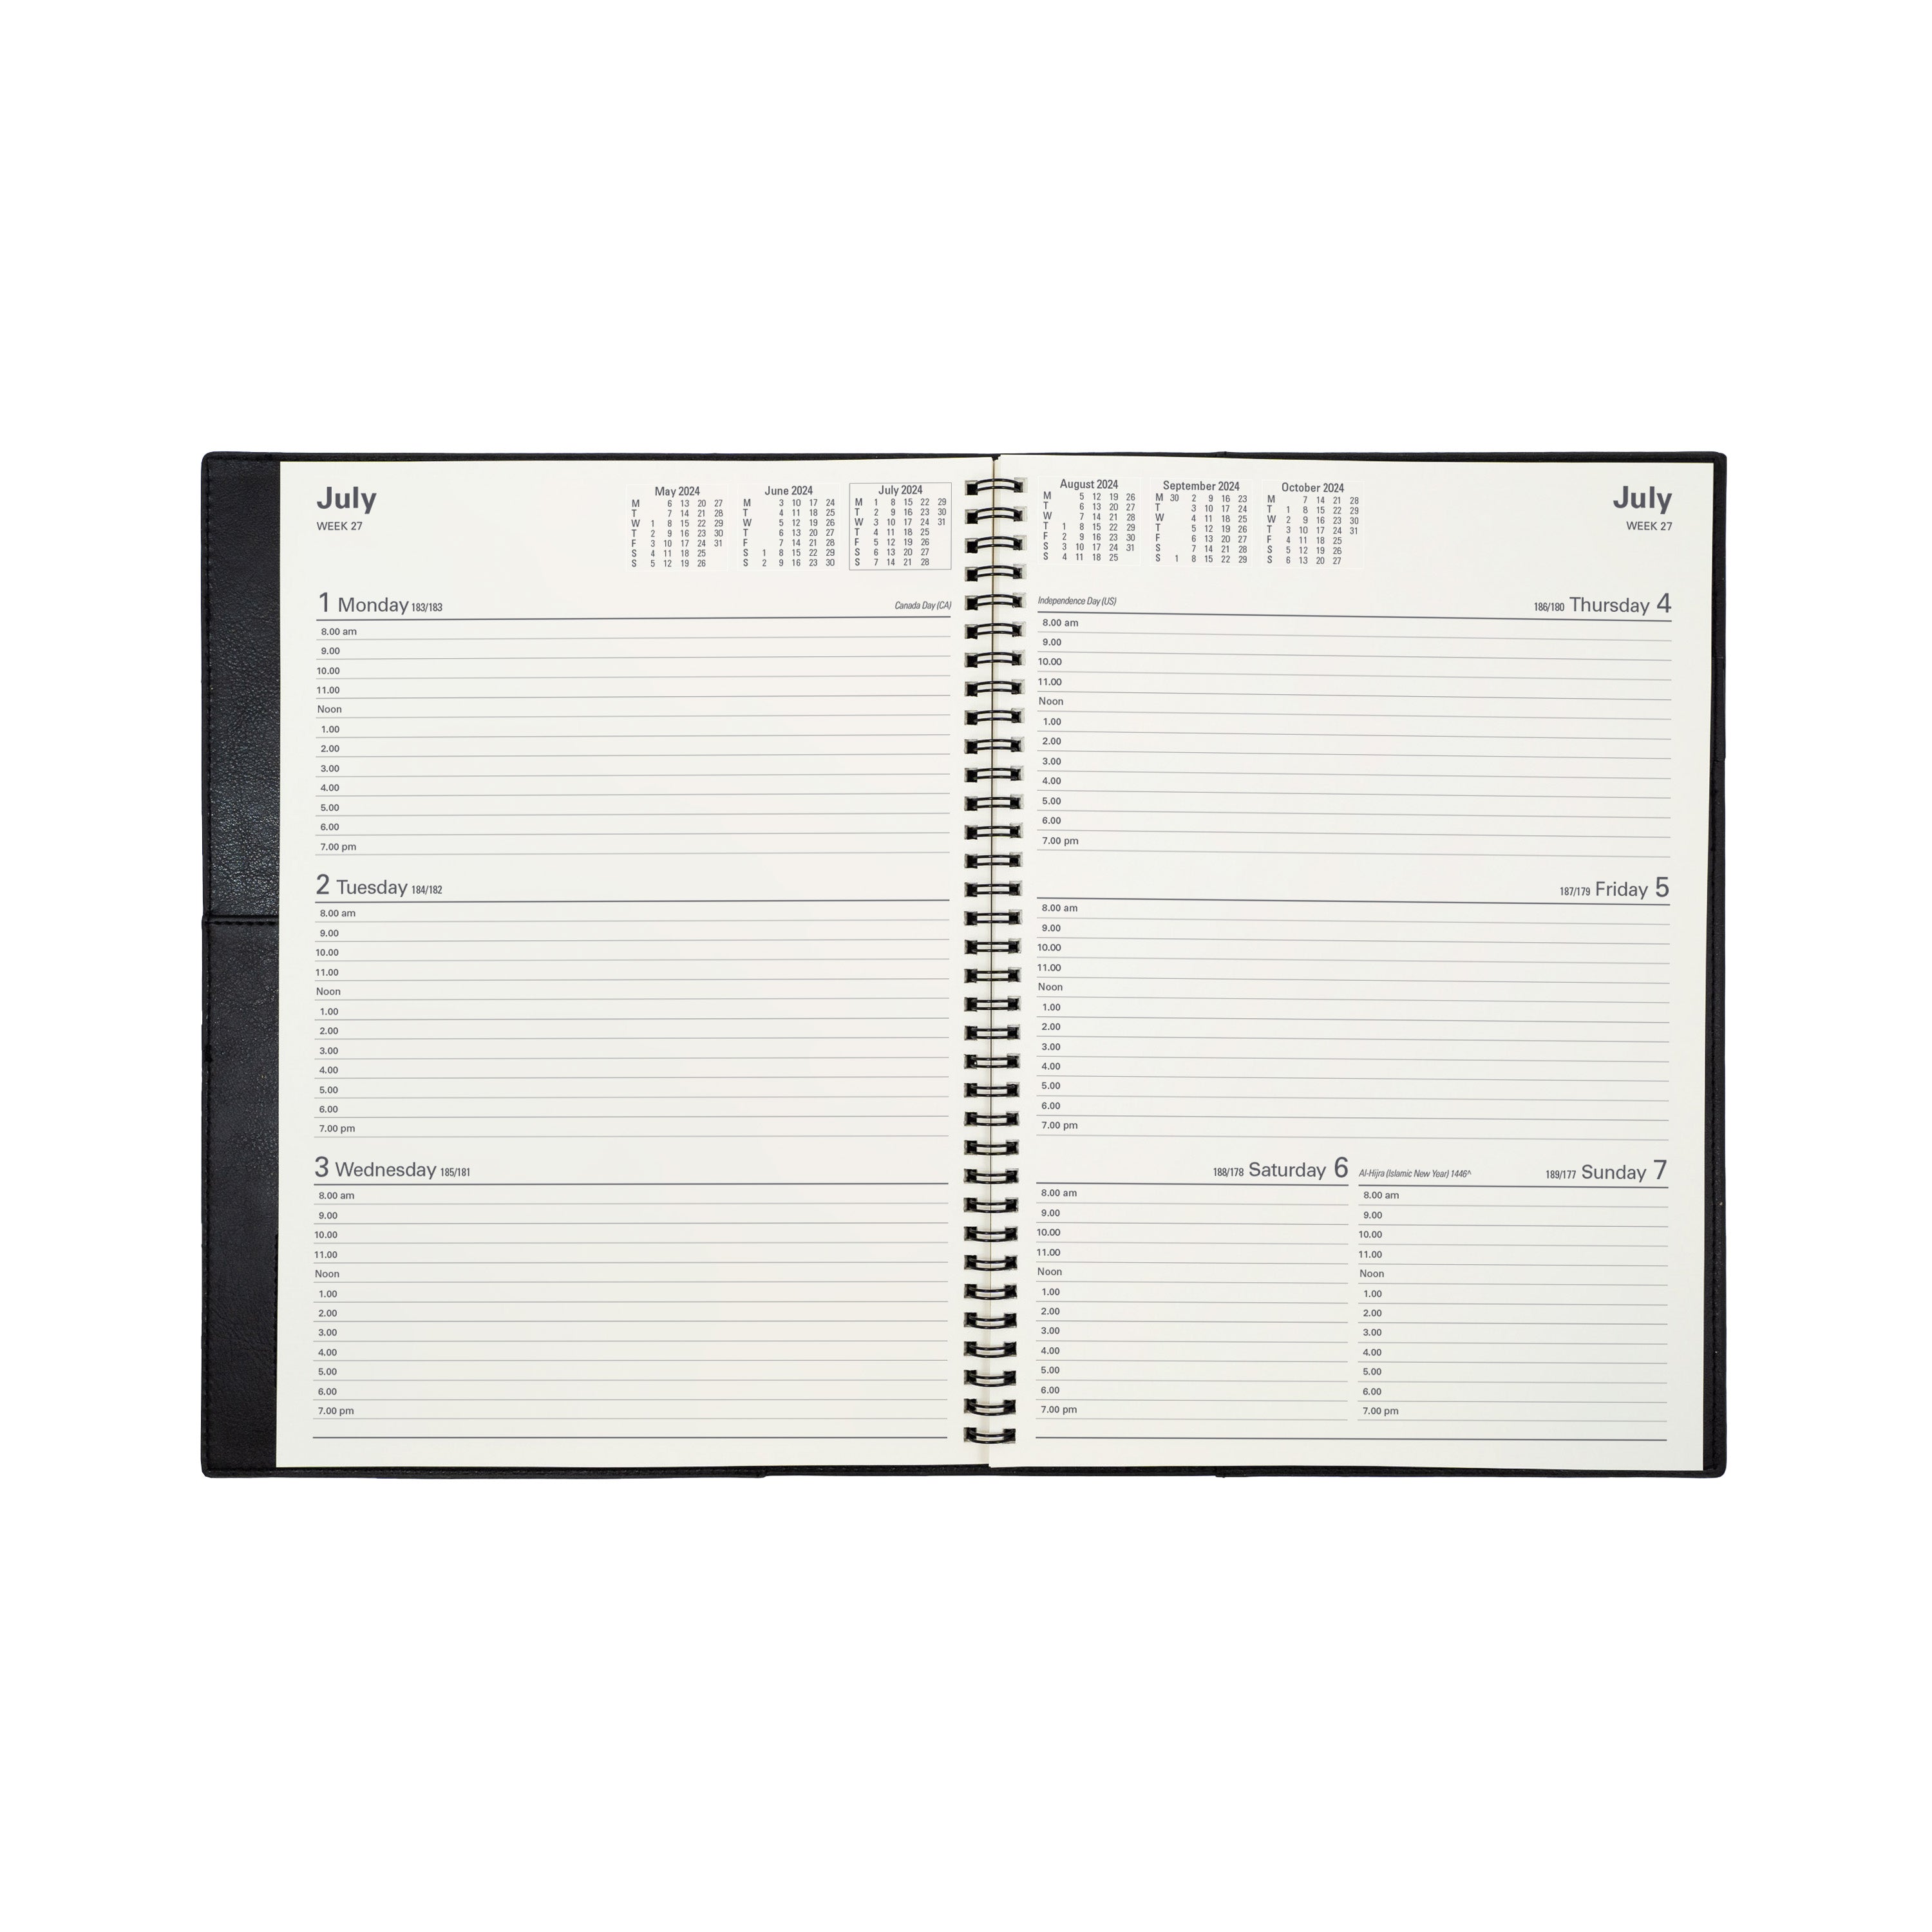 Collins Vanessa 2024 Diary - Week to View (8am - 7pm, hourly)